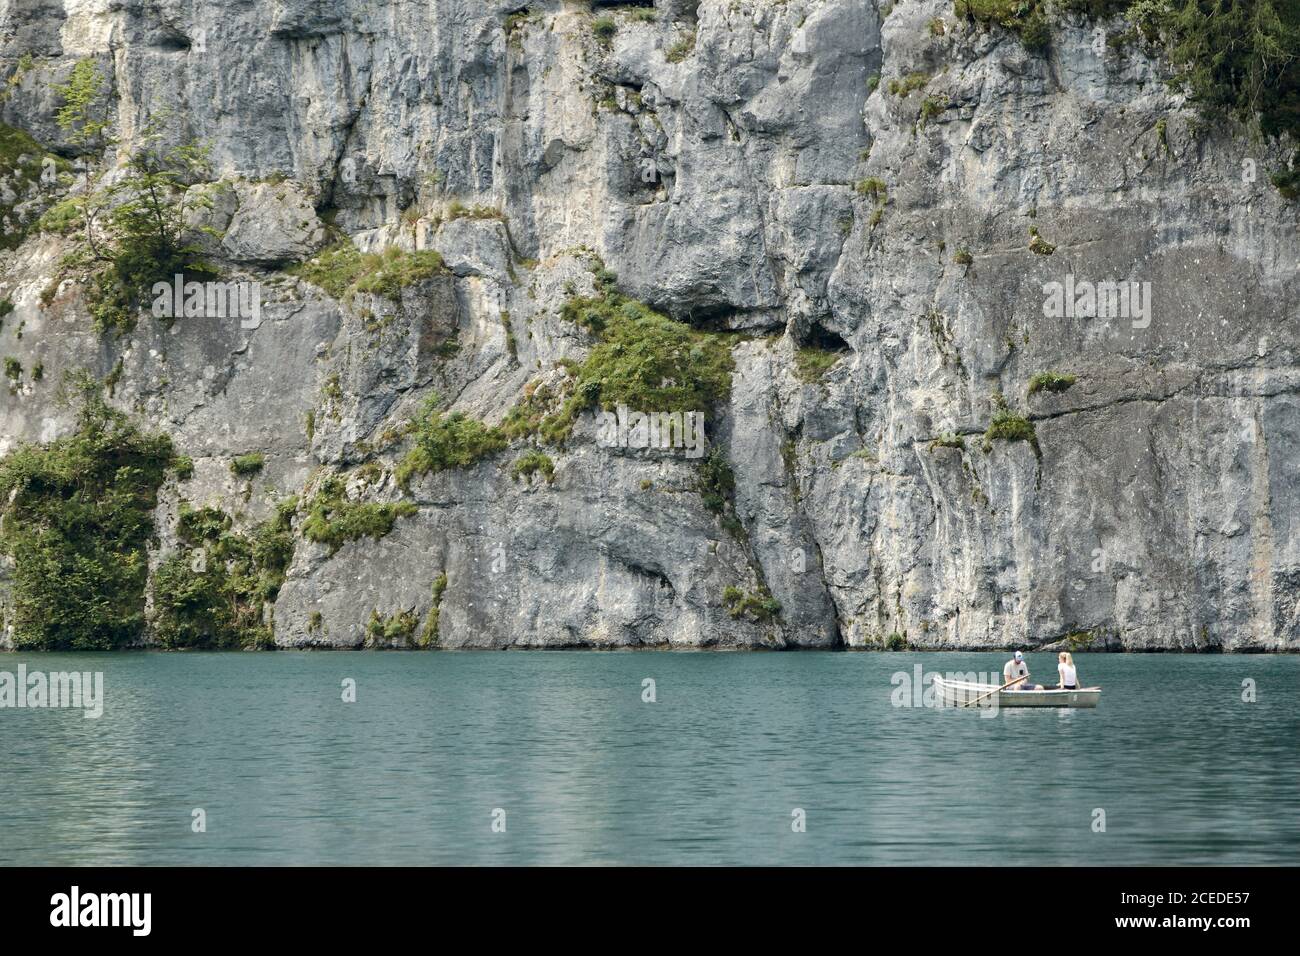 Couple in a rowing boat on lake Koenigssee enjoying picturesque scenery in front of huge rock face Stock Photo